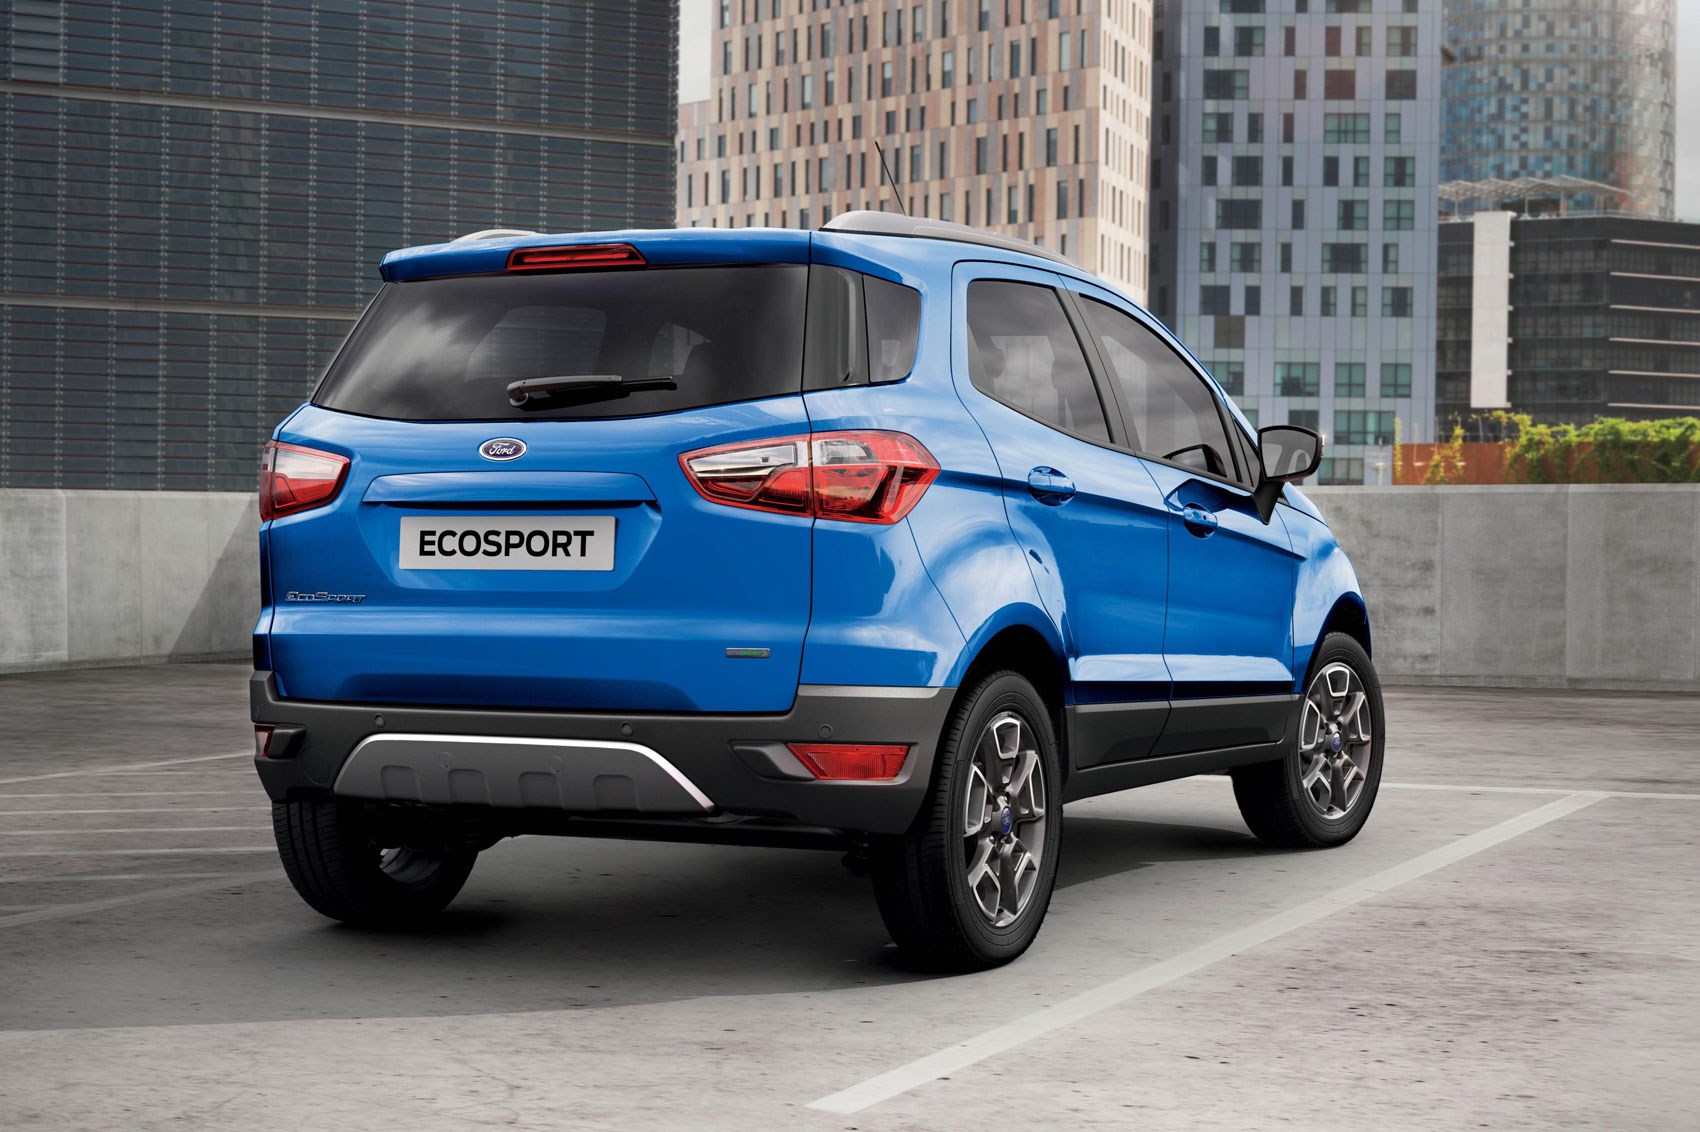 New(er), improved Ford Ecosport: has Ford fixed it?